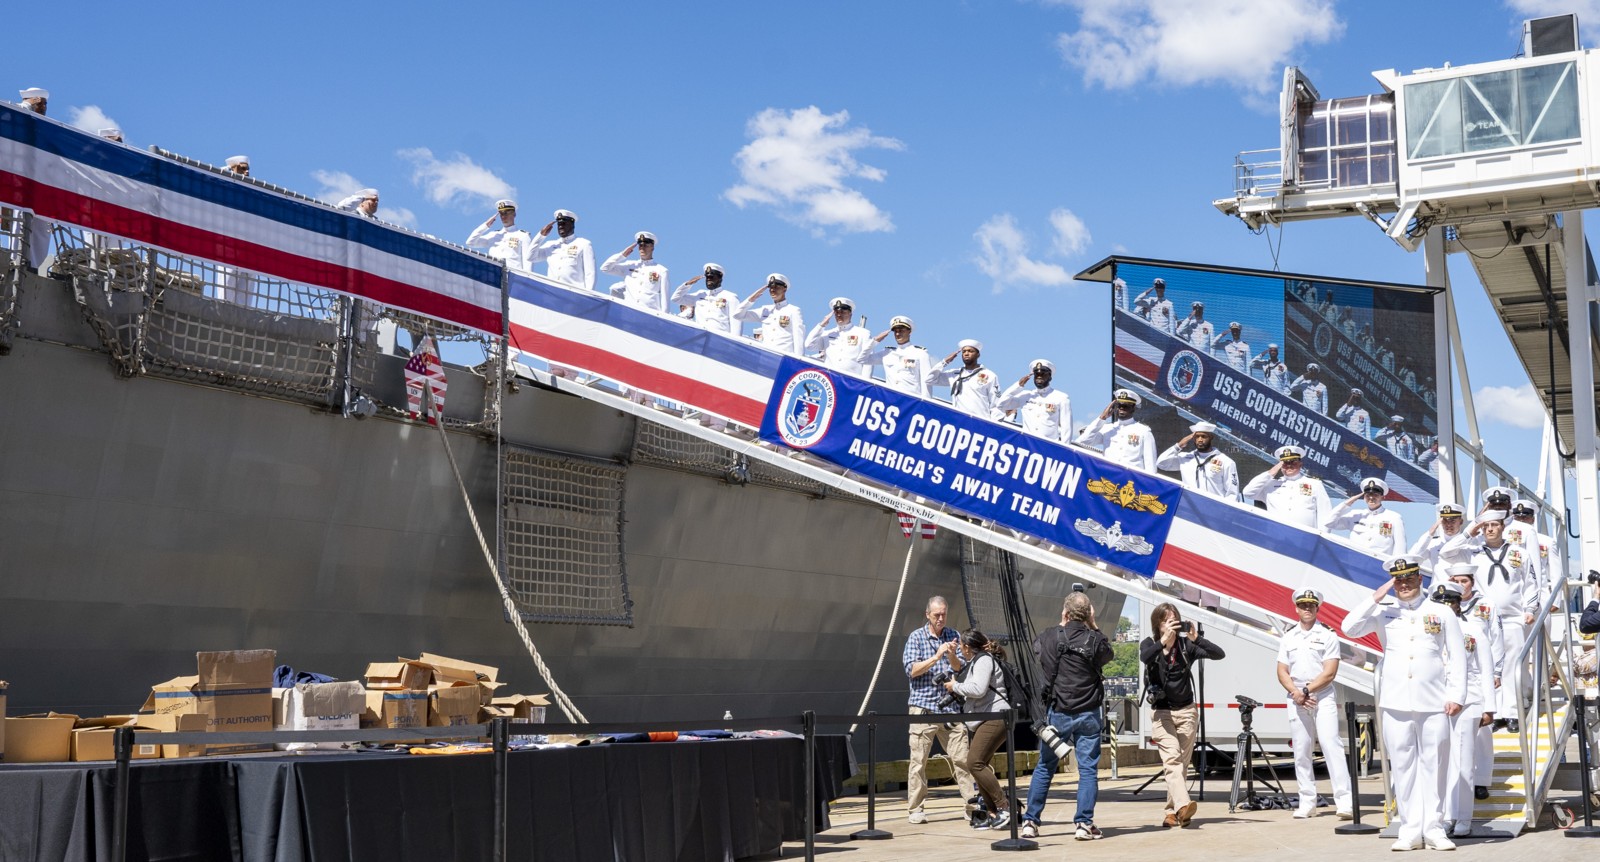 lcs-23 uss cooperstown freedom class littoral combat ship us navy commissioning ceremony new york city 26